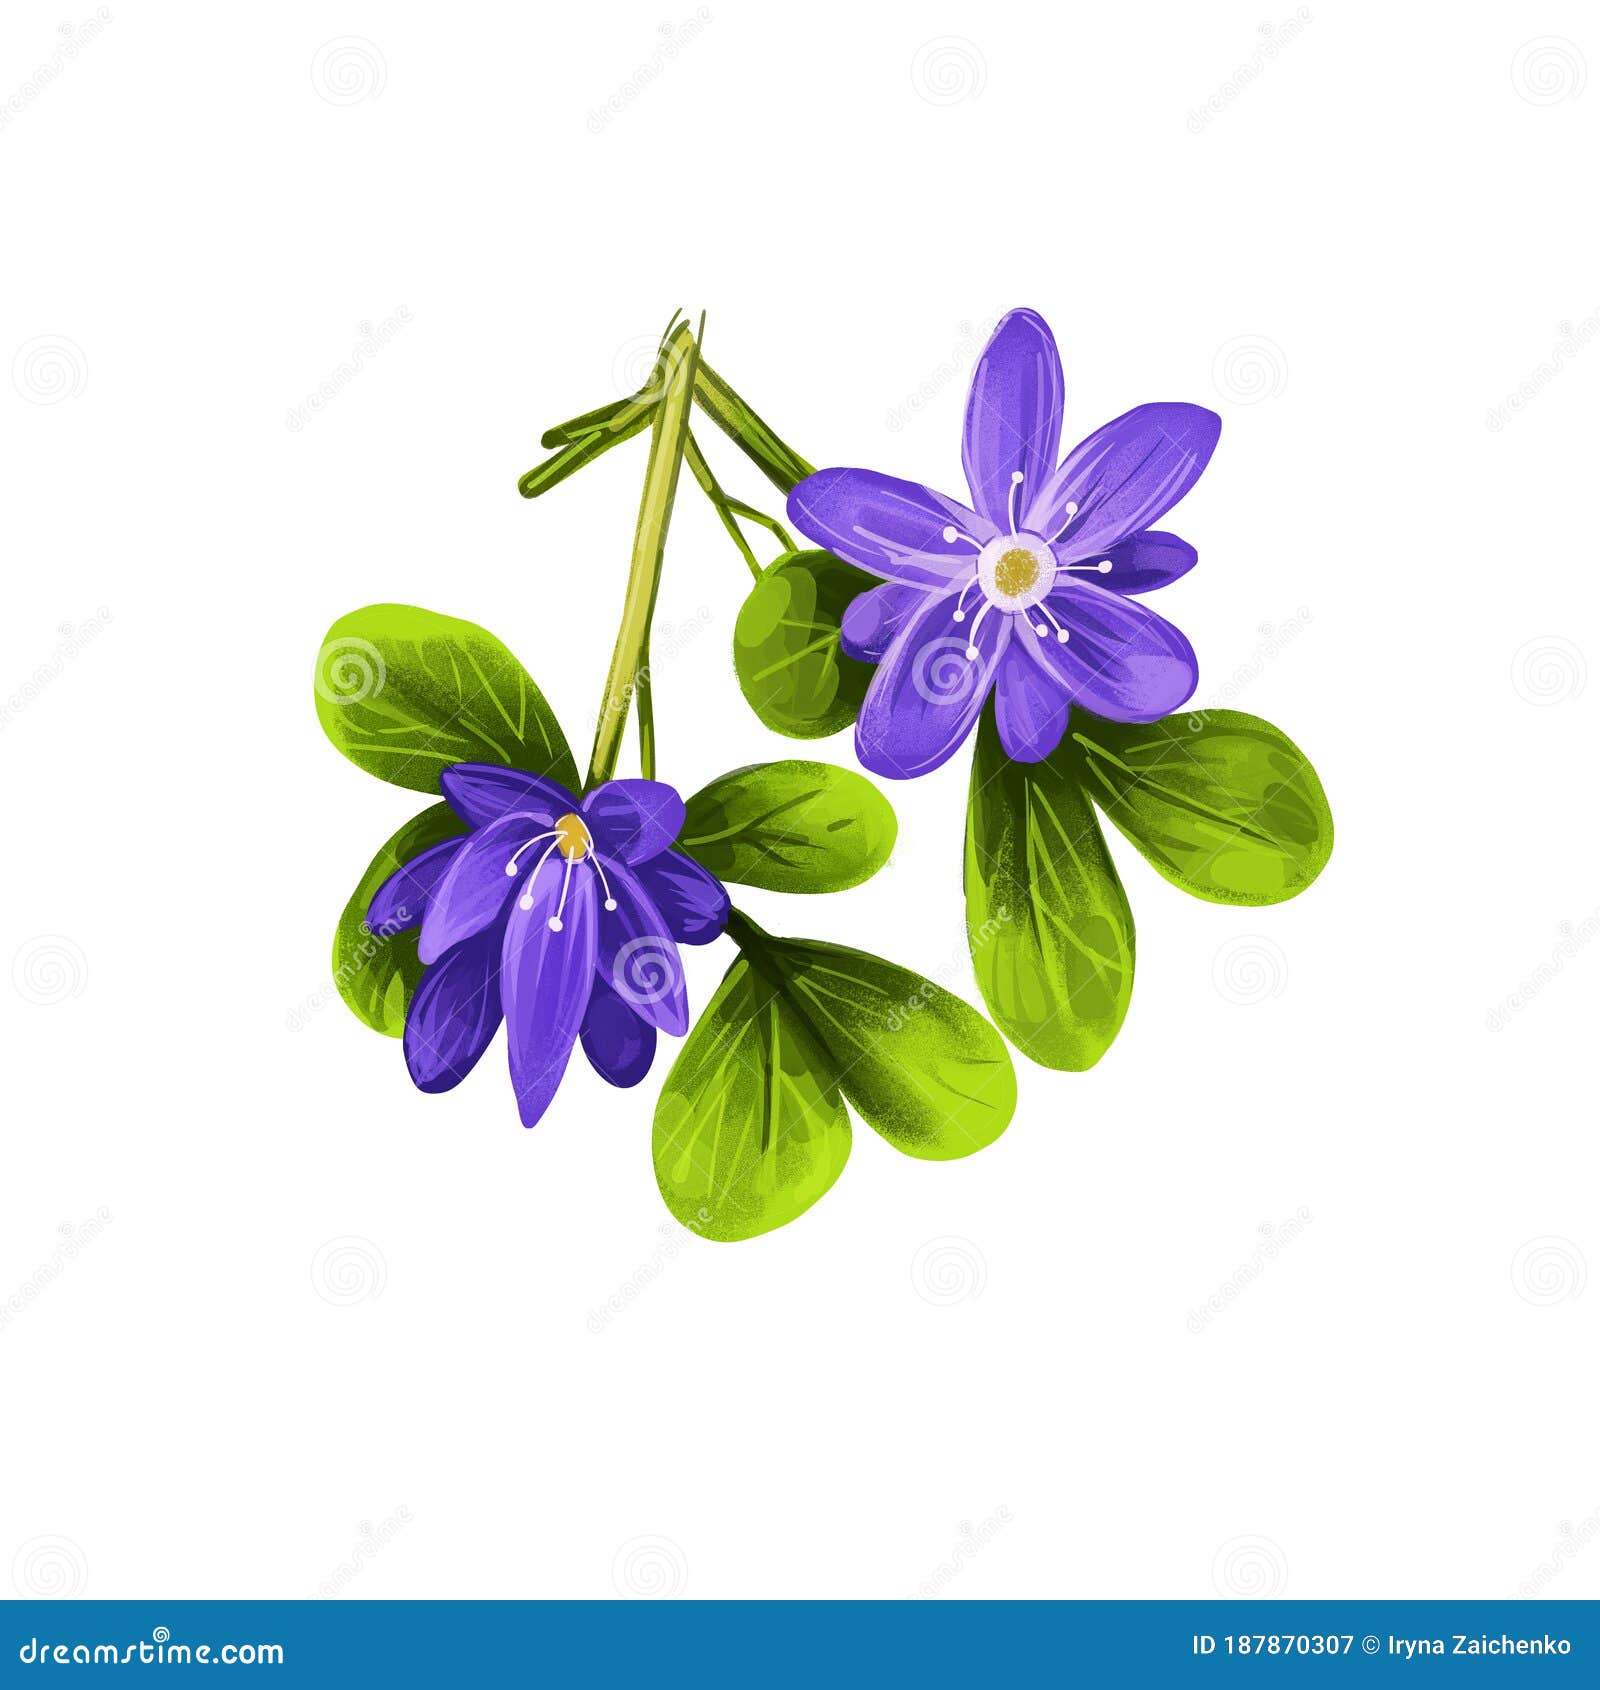 guaiacum digital art   on white. lignum-vitae, guayacan, or ga ac, blue flowers and green leaves. herb with